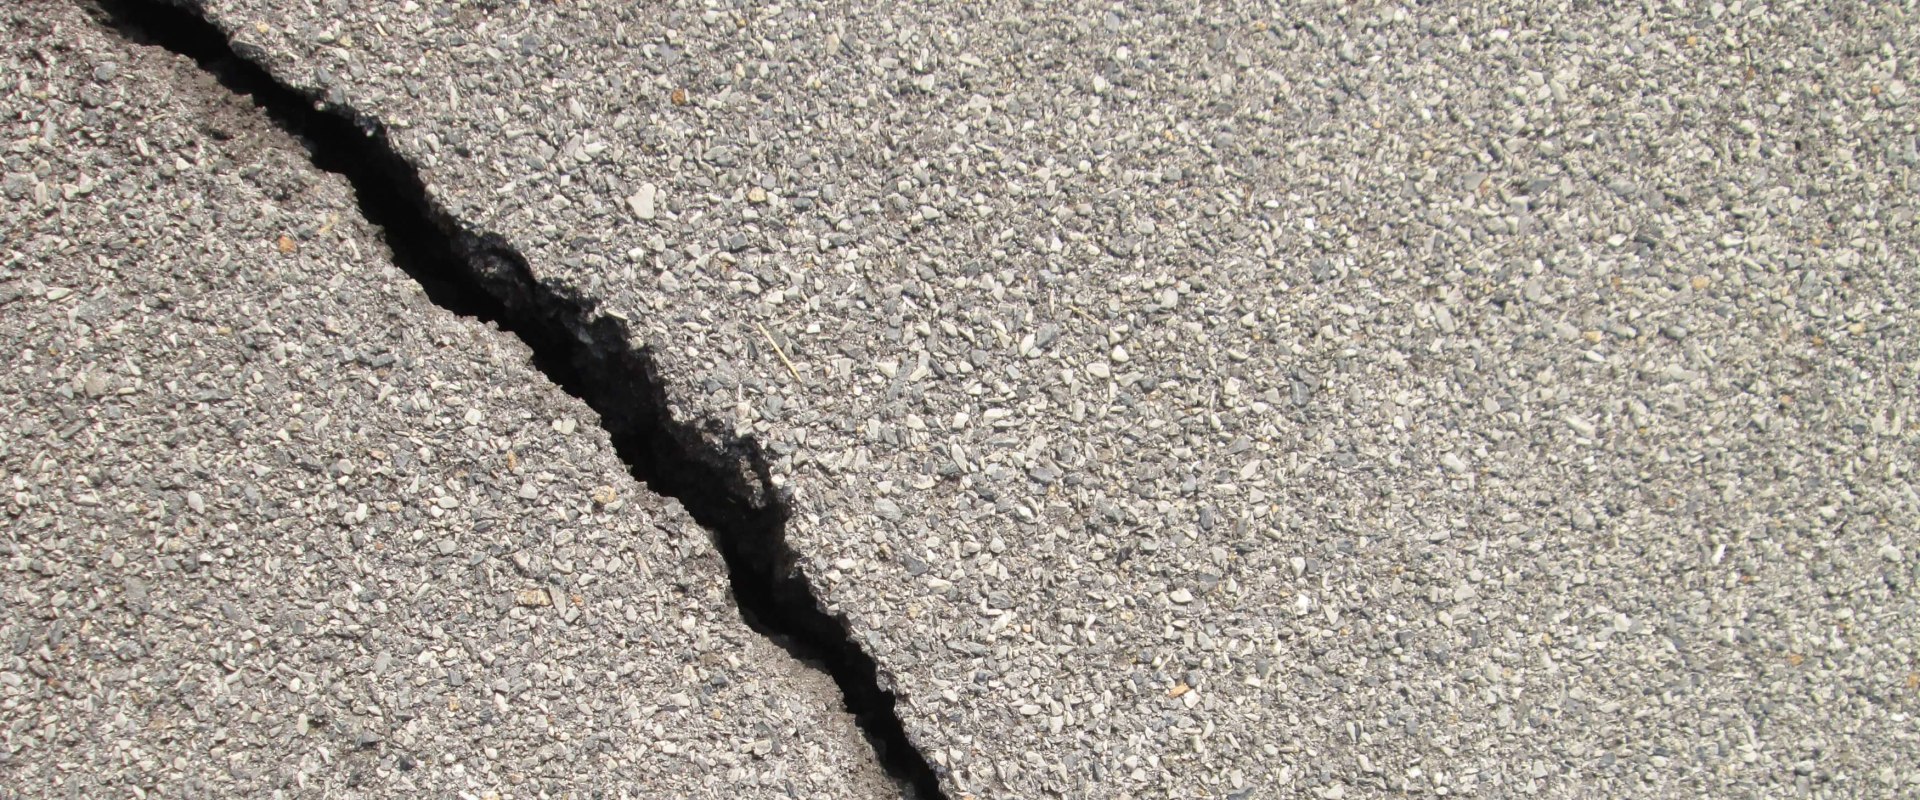 How to Repair Cracks in a Concrete Roadway